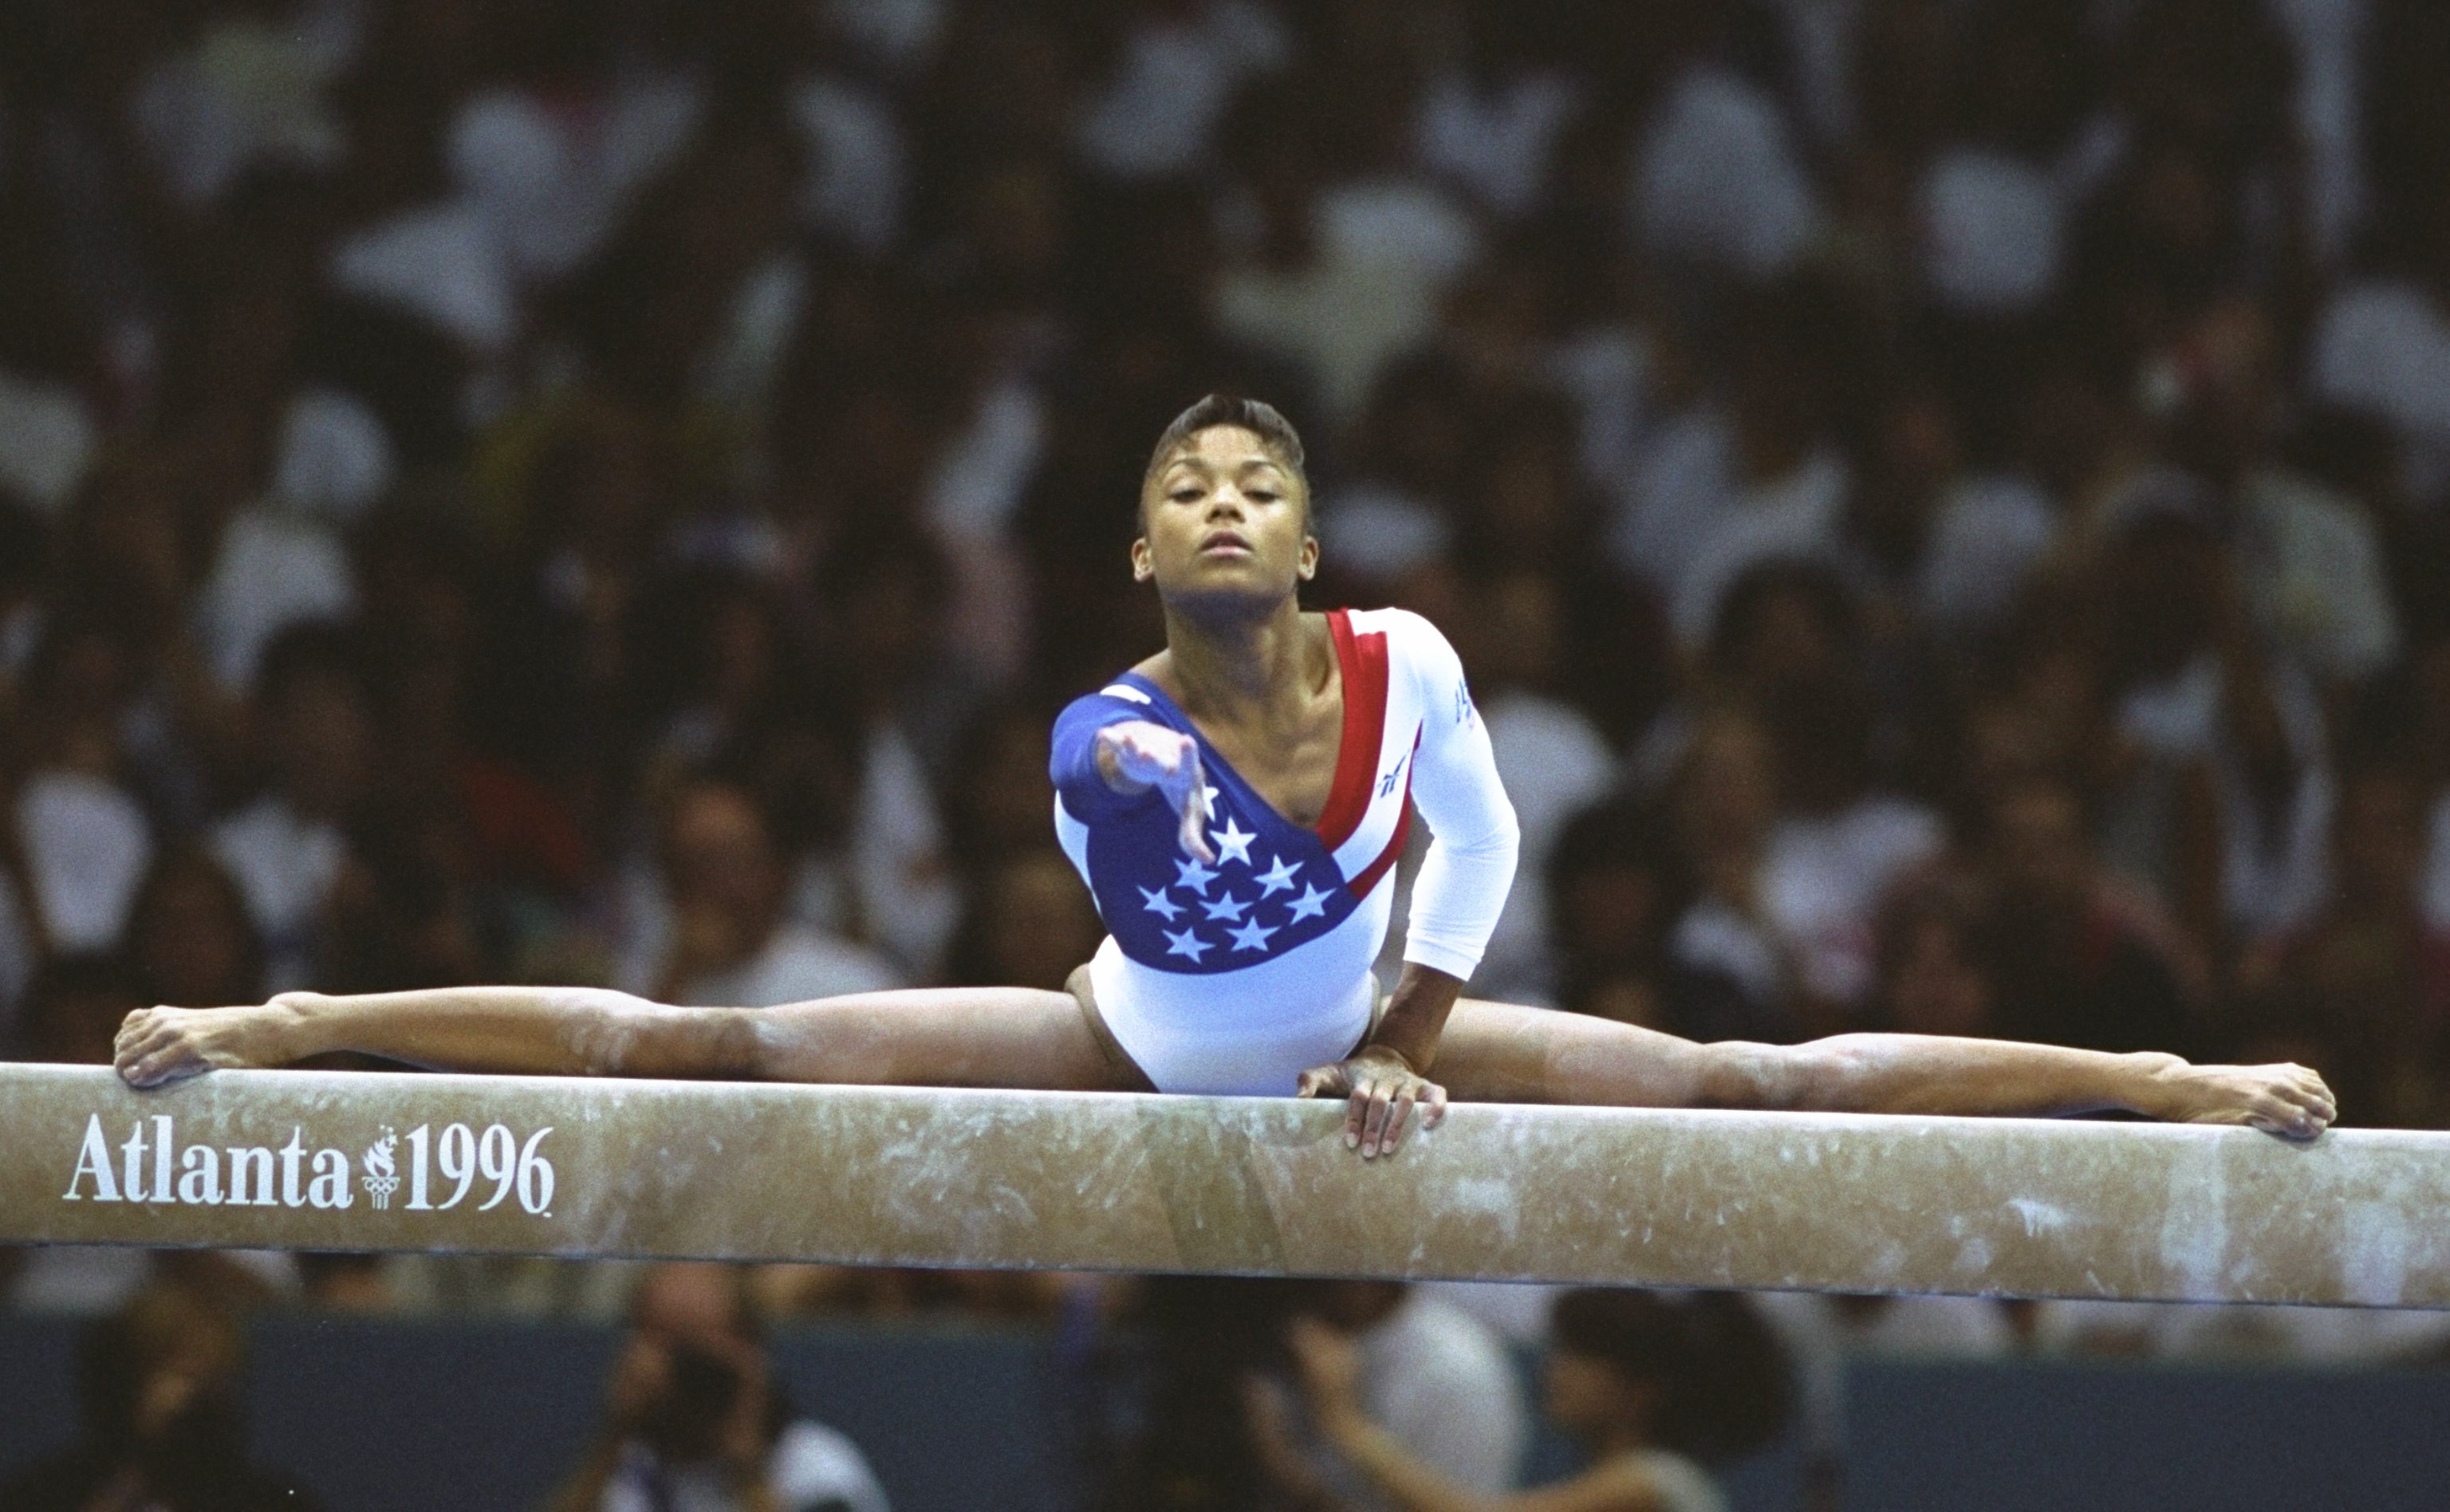 Dominique Dawes of the USA on the beam during the womens team gymnastics event at the Georgia Dome at the 1996 Centennial Olympic Games in Atlanta on July 23, 1996.